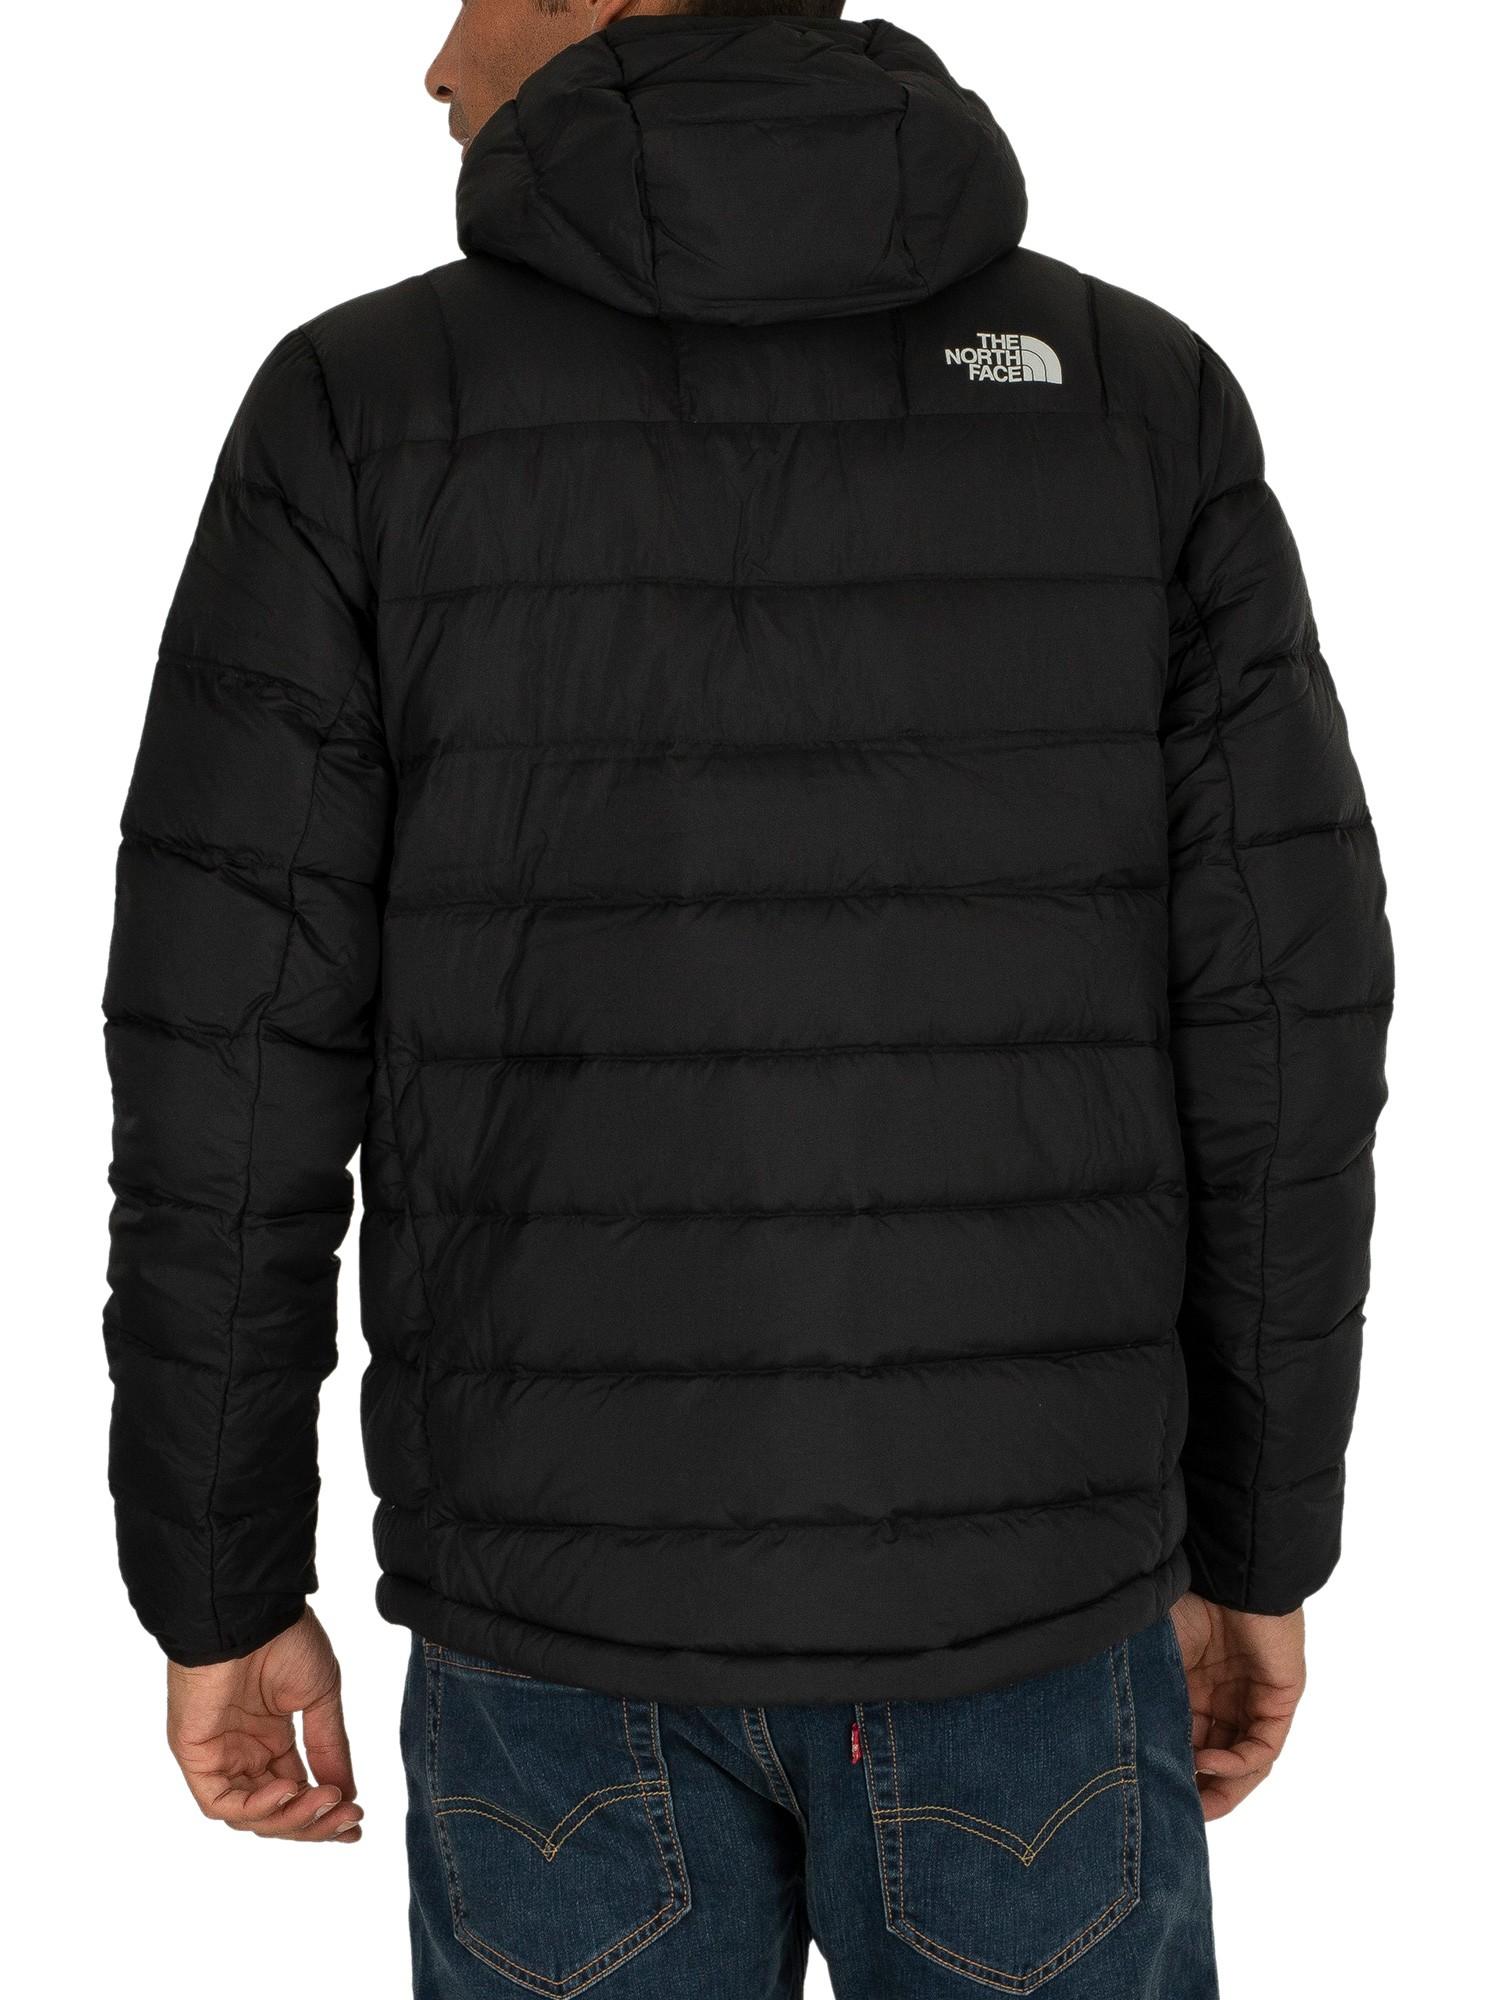 The North Face Synthetic La Paz Down Jacket in Black for Men - Save 35% -  Lyst